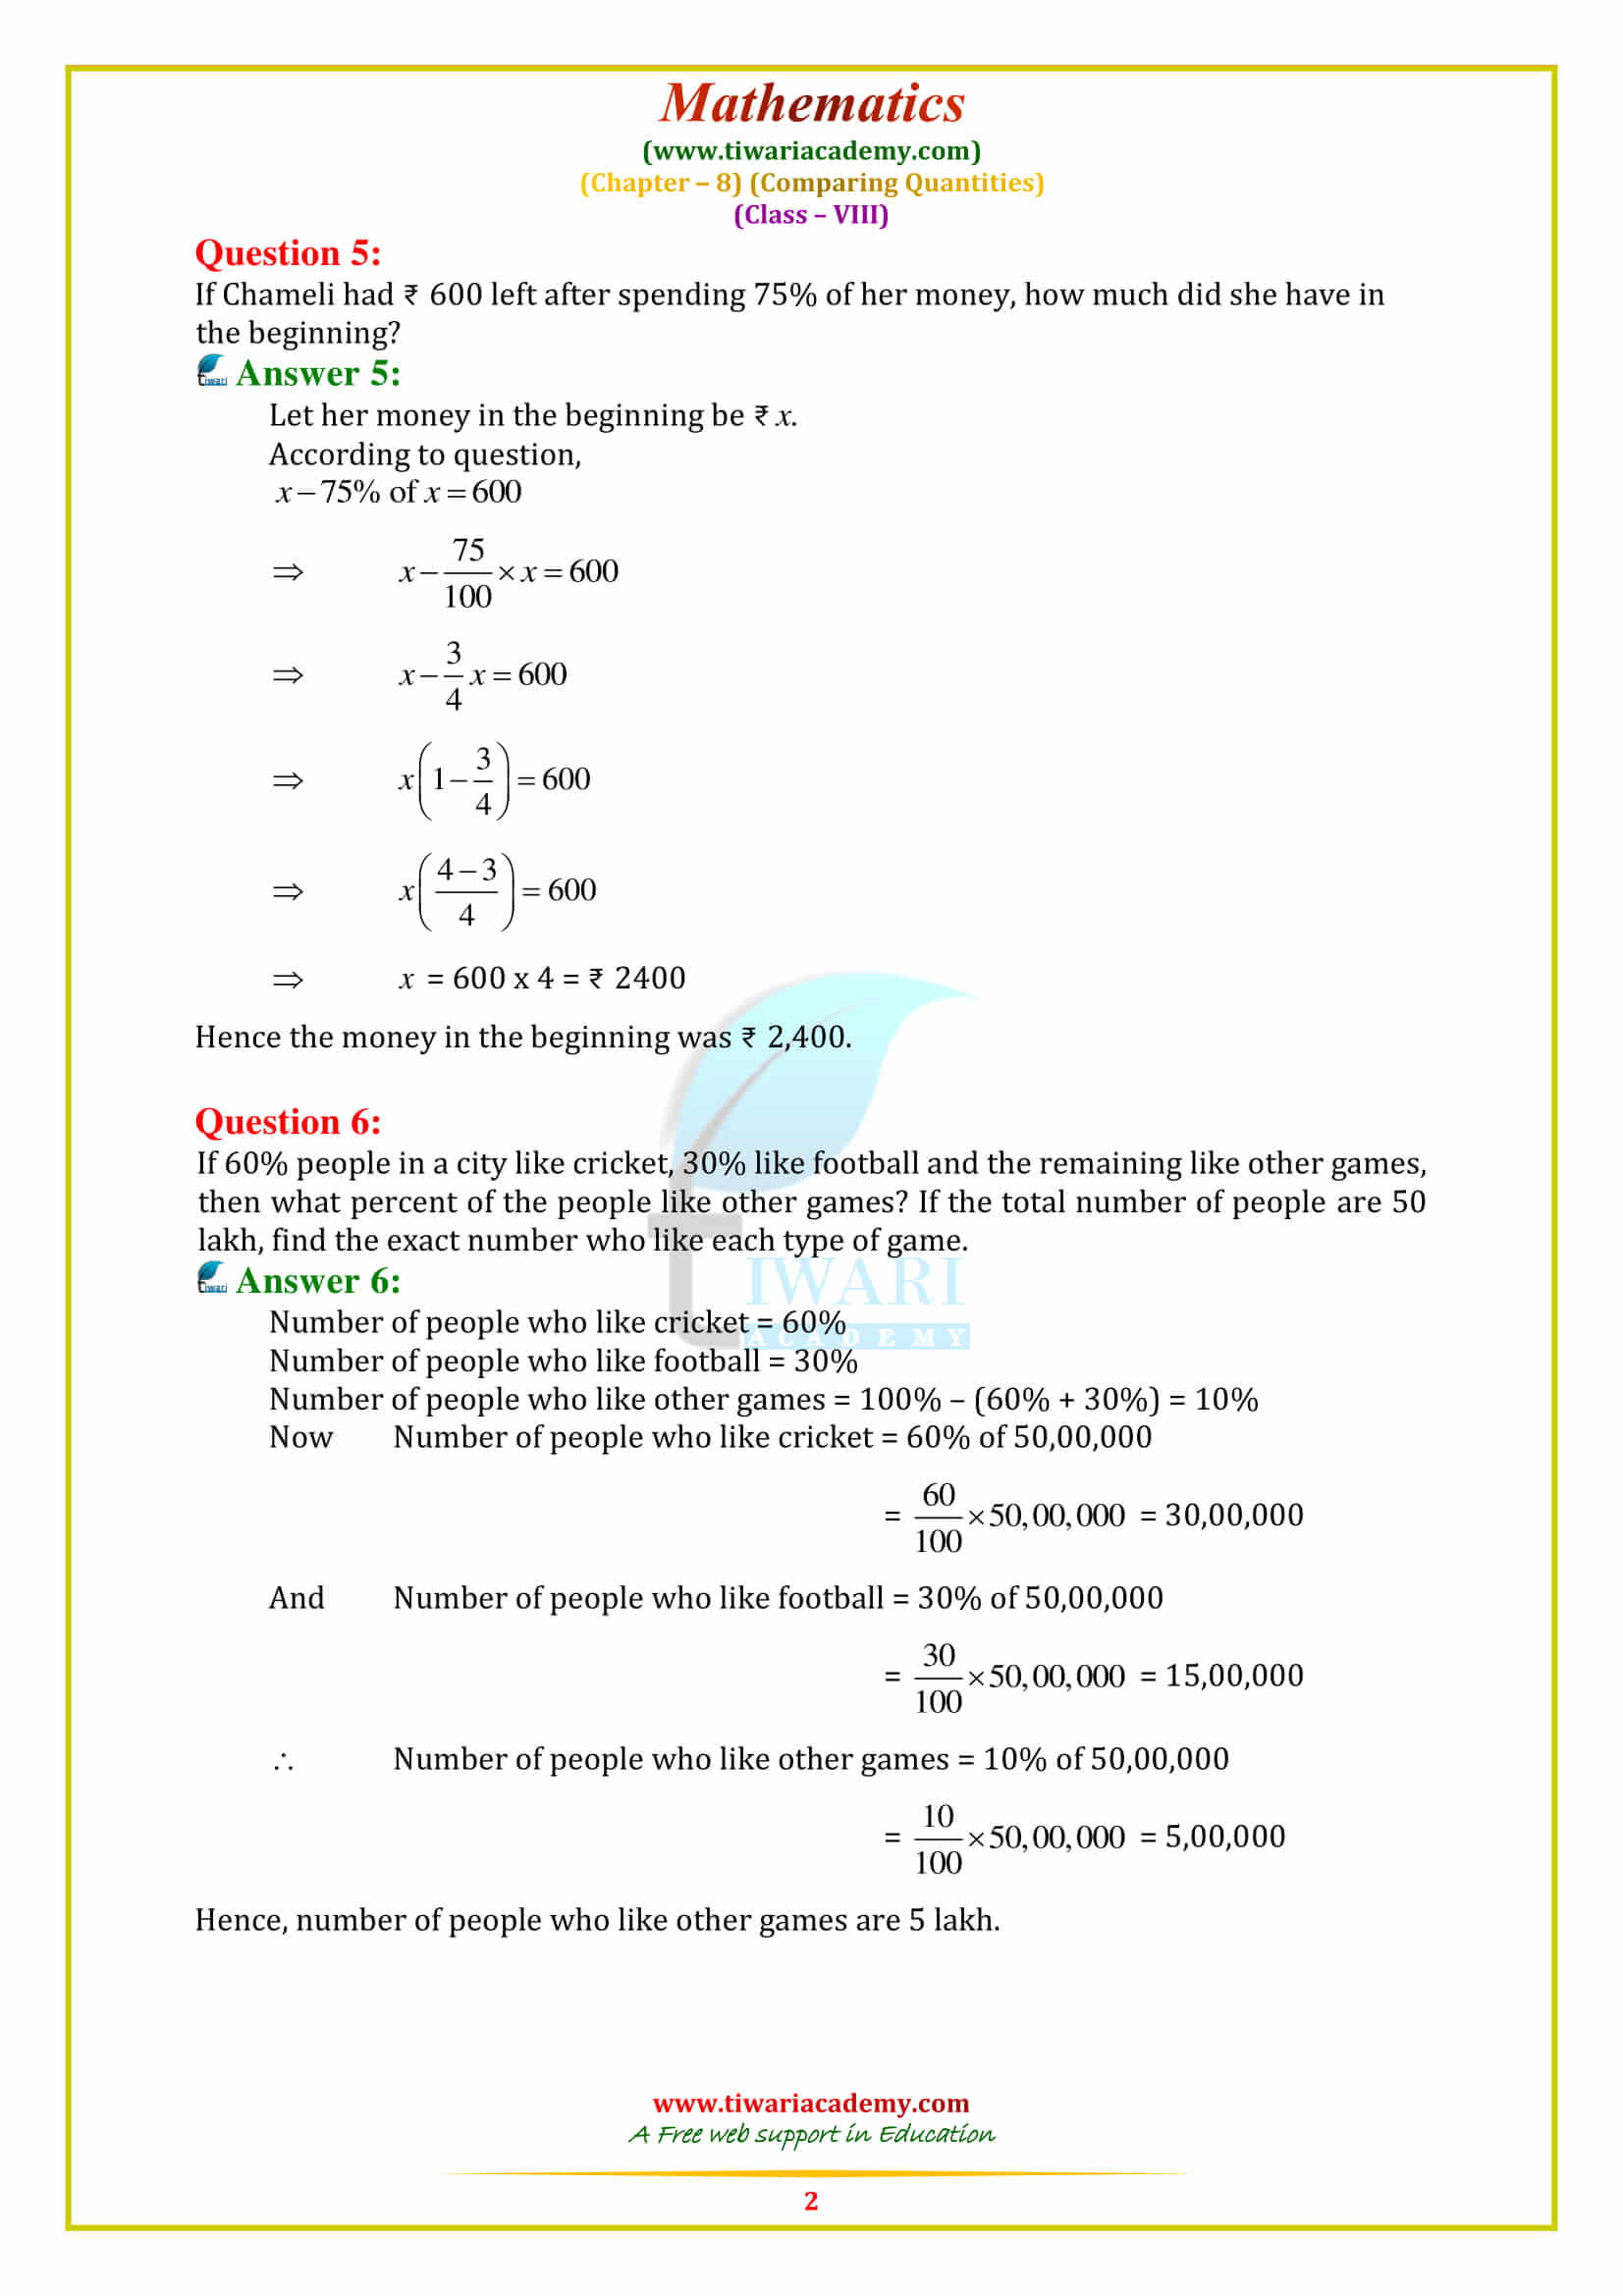 NCERT Solutions for Class 8 Maths Chapter 8 COMPARING QUANTITIES ex. 8.1 in englsh